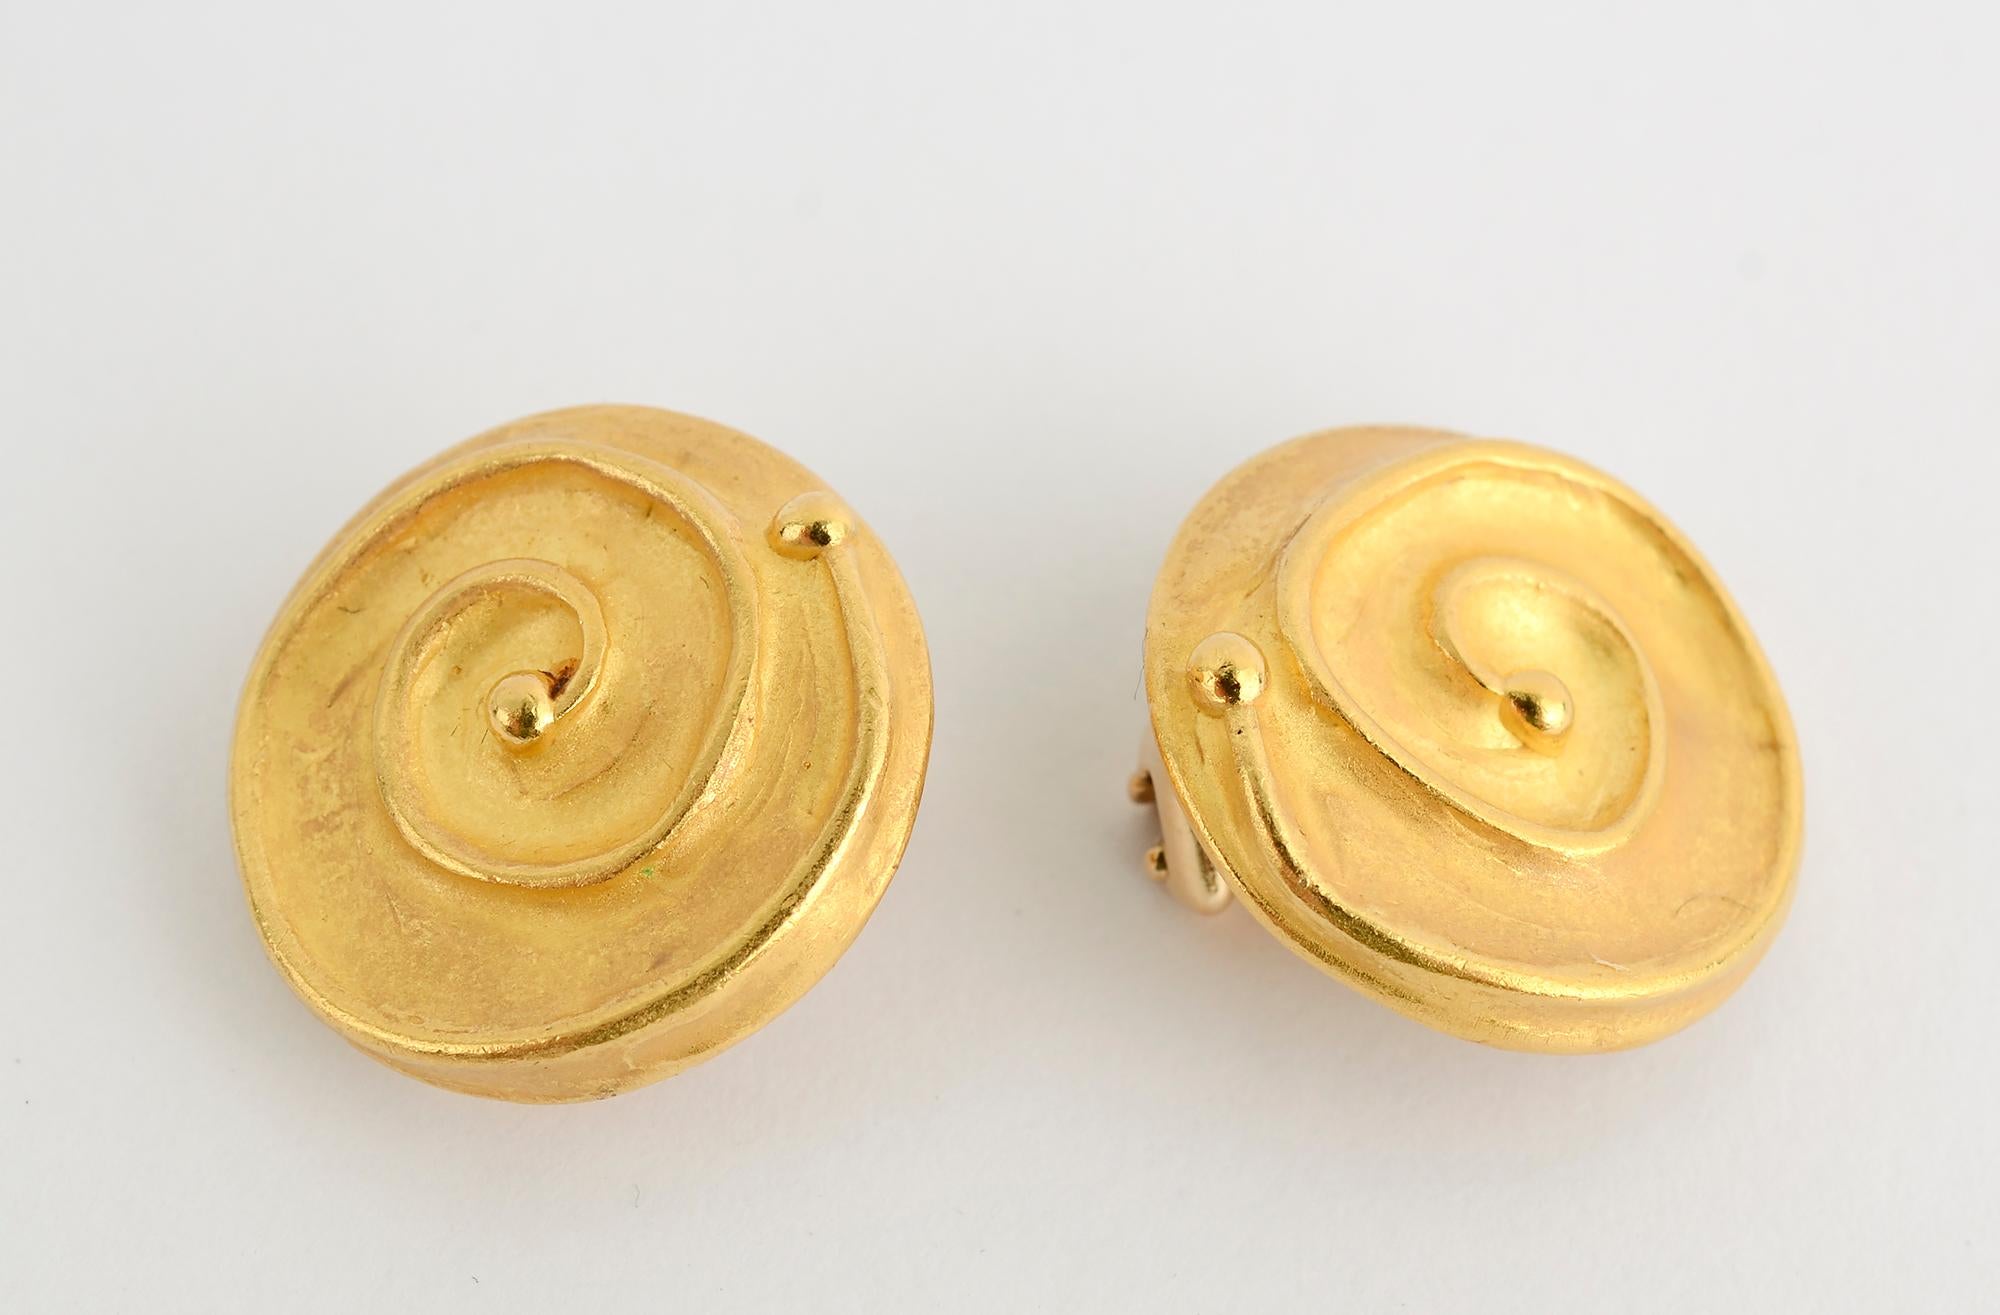 Stylish earrings by Denise Roberge that look simultaneously ancient and modern. An irregular glossy gold coil sits upon a matte finish disc. The back, which would only be seen by the wearer, has yet another texture. Clip backs can be converted to